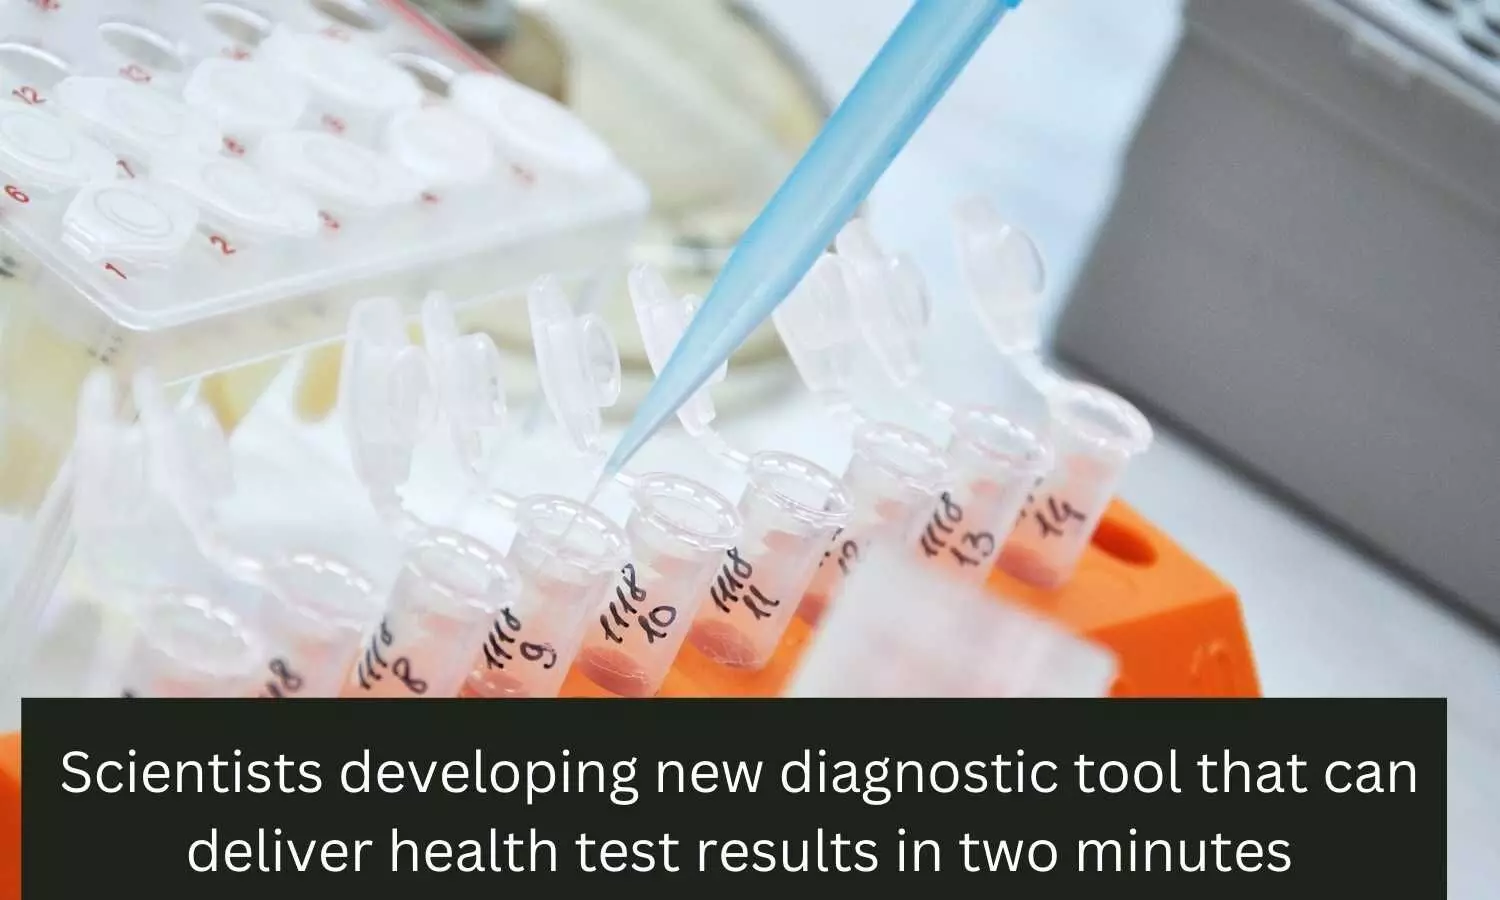 Scientists developing new diagnostic tool that can deliver health test results in two minutes